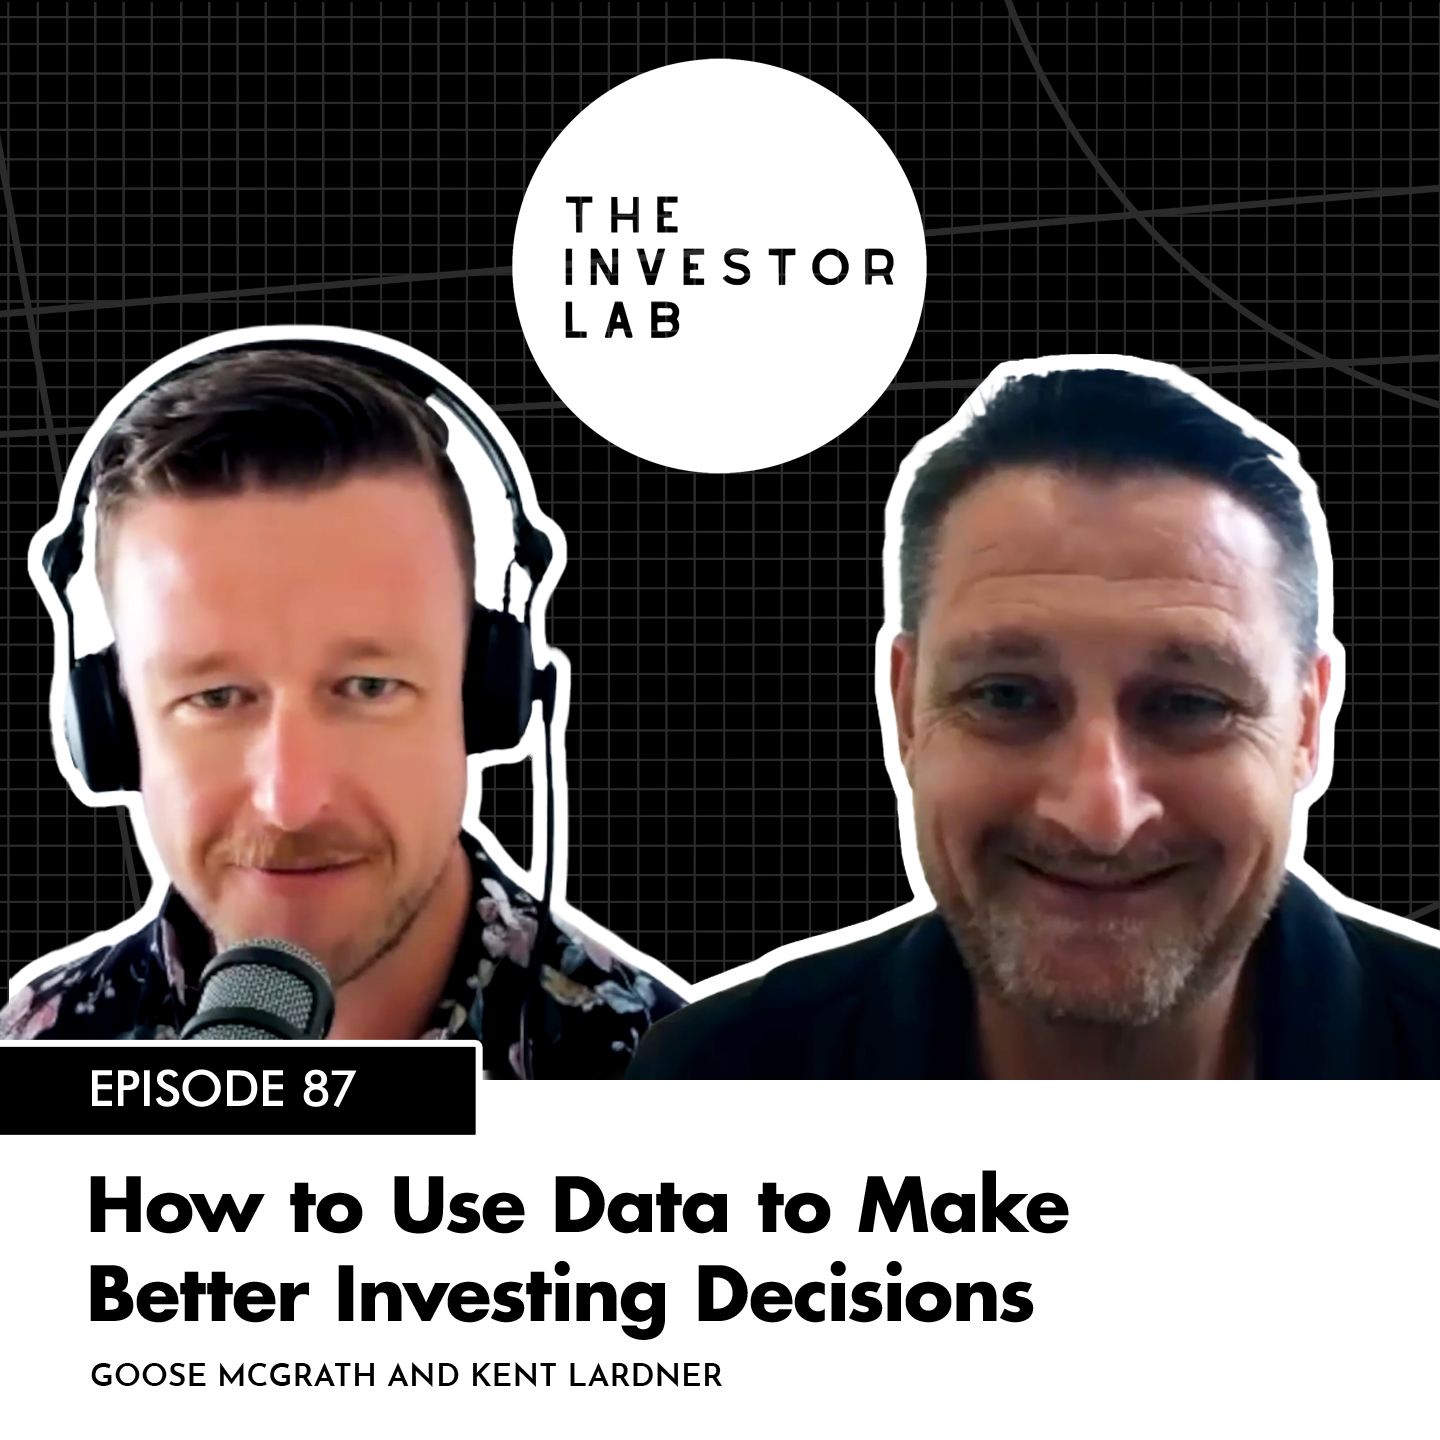 How to Use Data to Make Better Investing Decisions with Kent Lardner